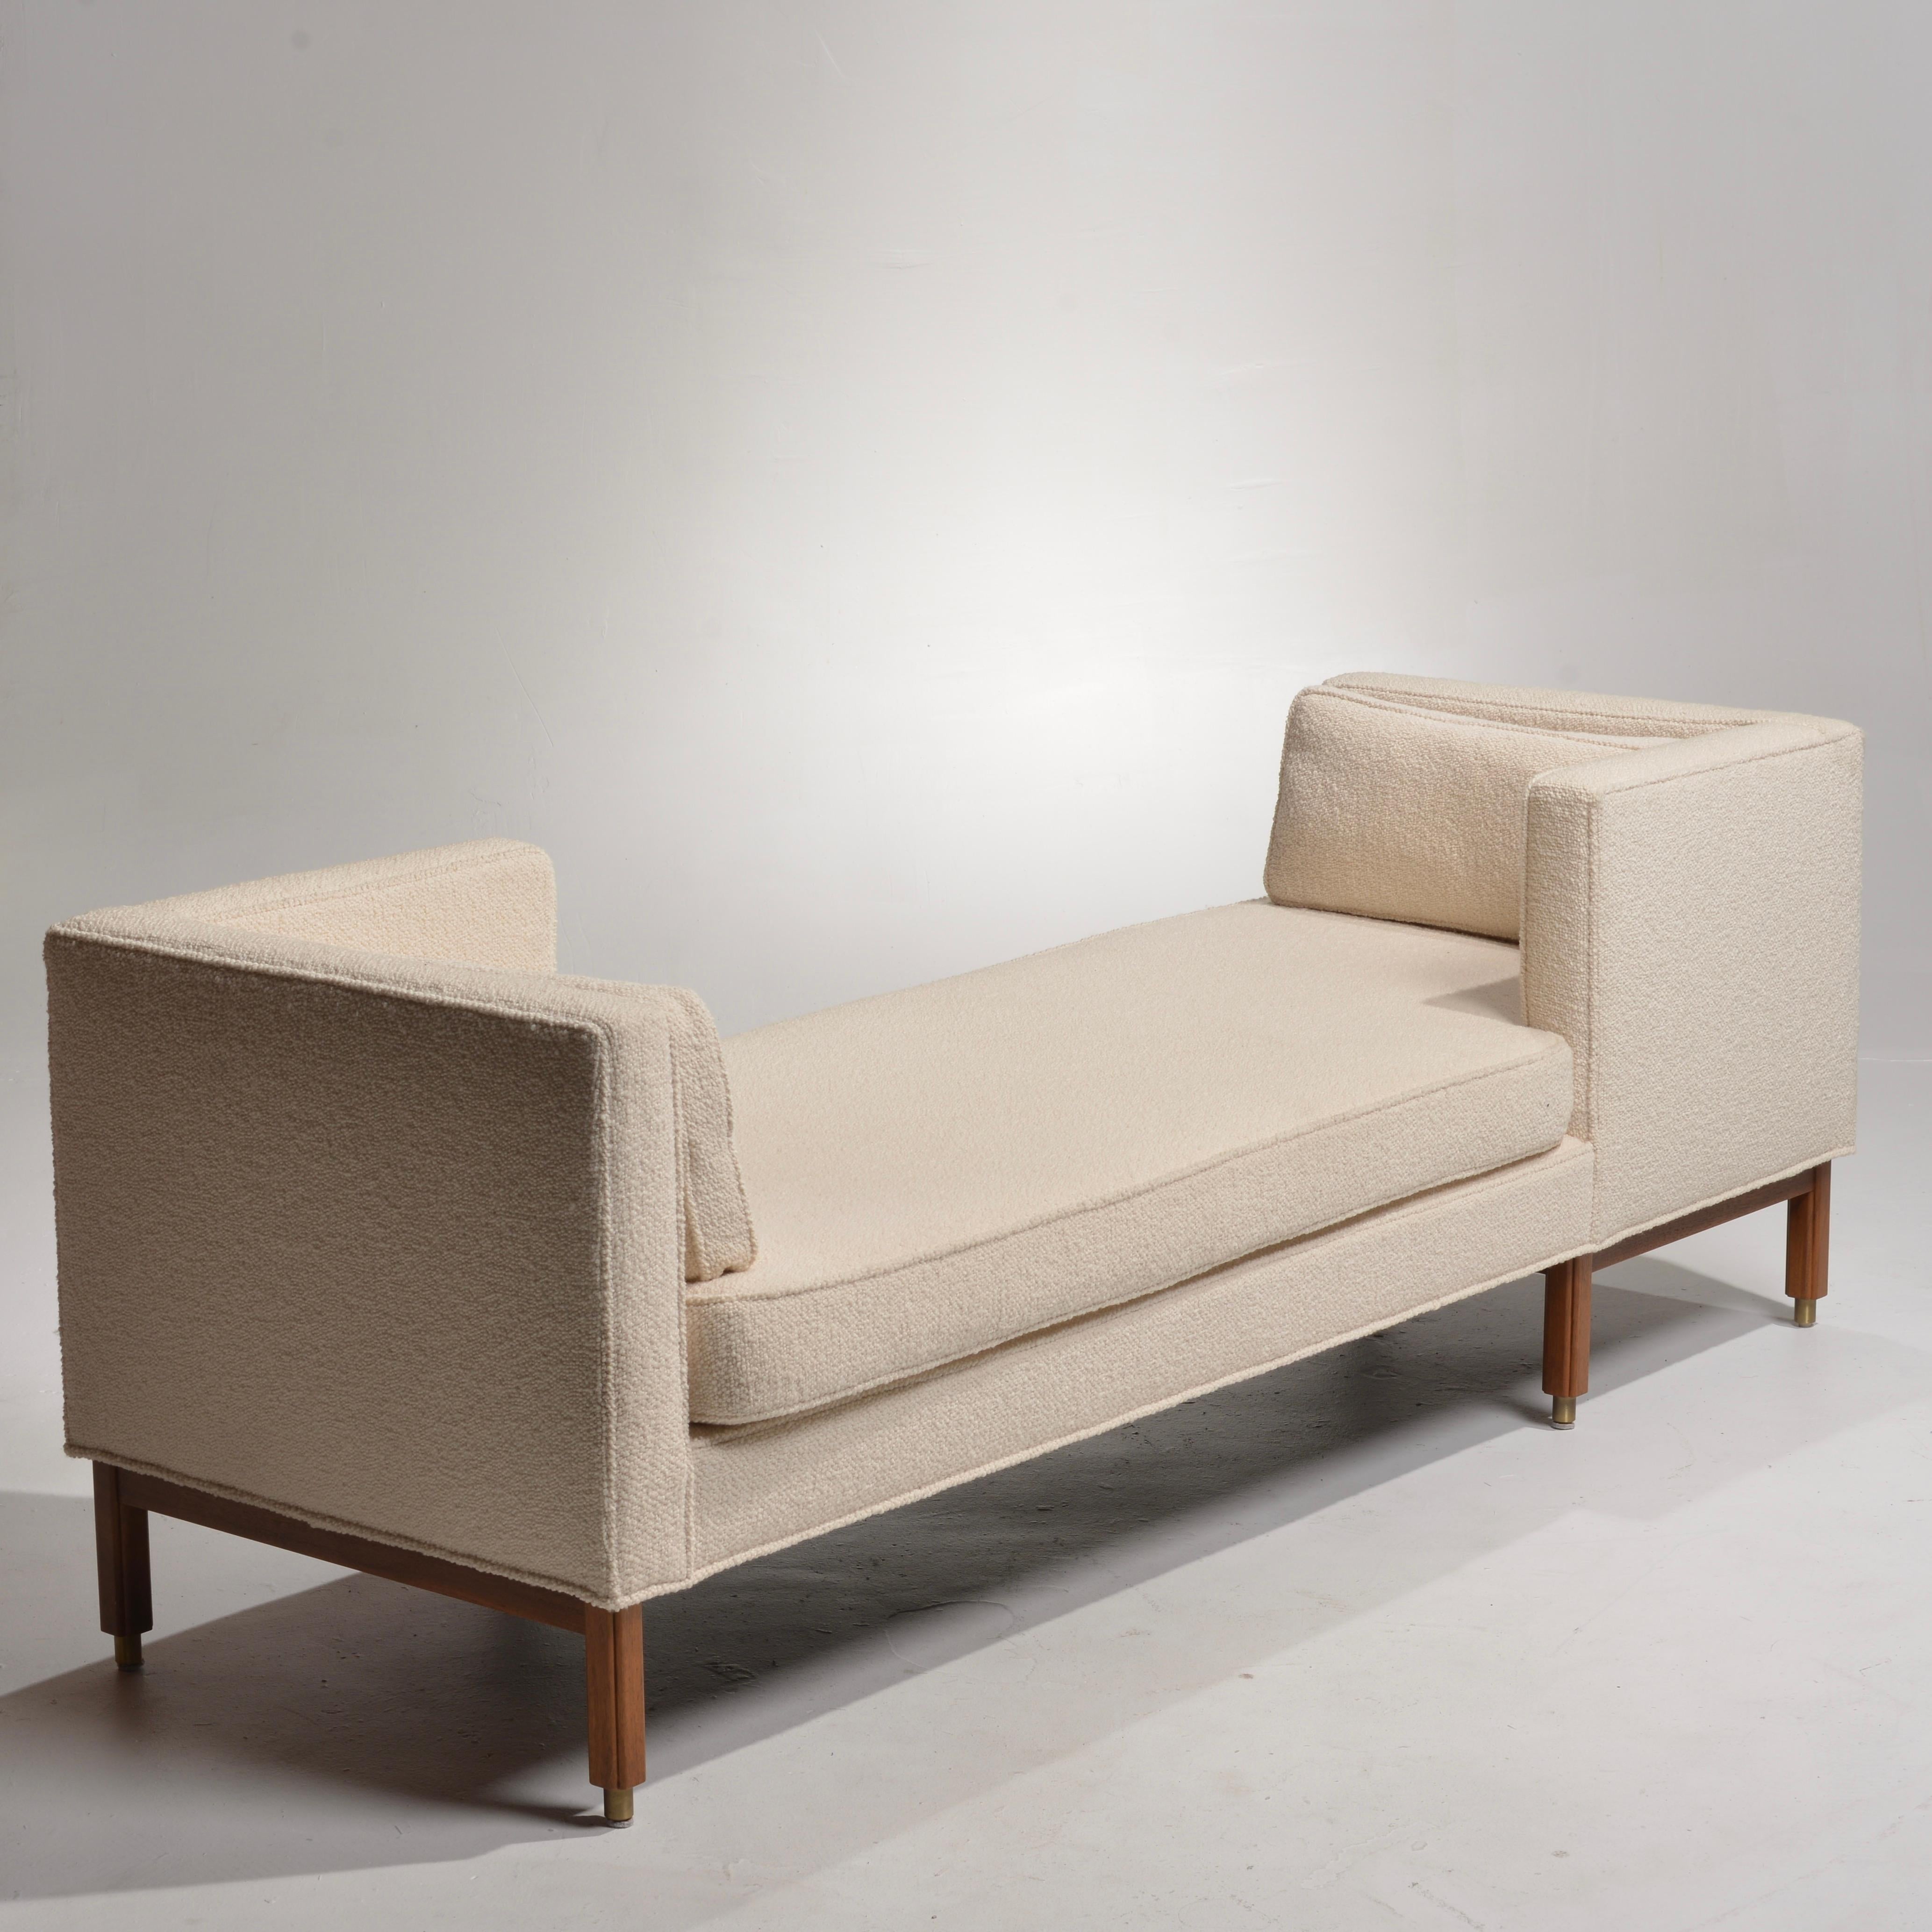 The Tete-a-Tete sofa and daybed with walnut base and brass feet is a great example of Edward Wormley's clean lines and simple elegance. This piece embodies his art of assemblage, juxtaposition and composition.